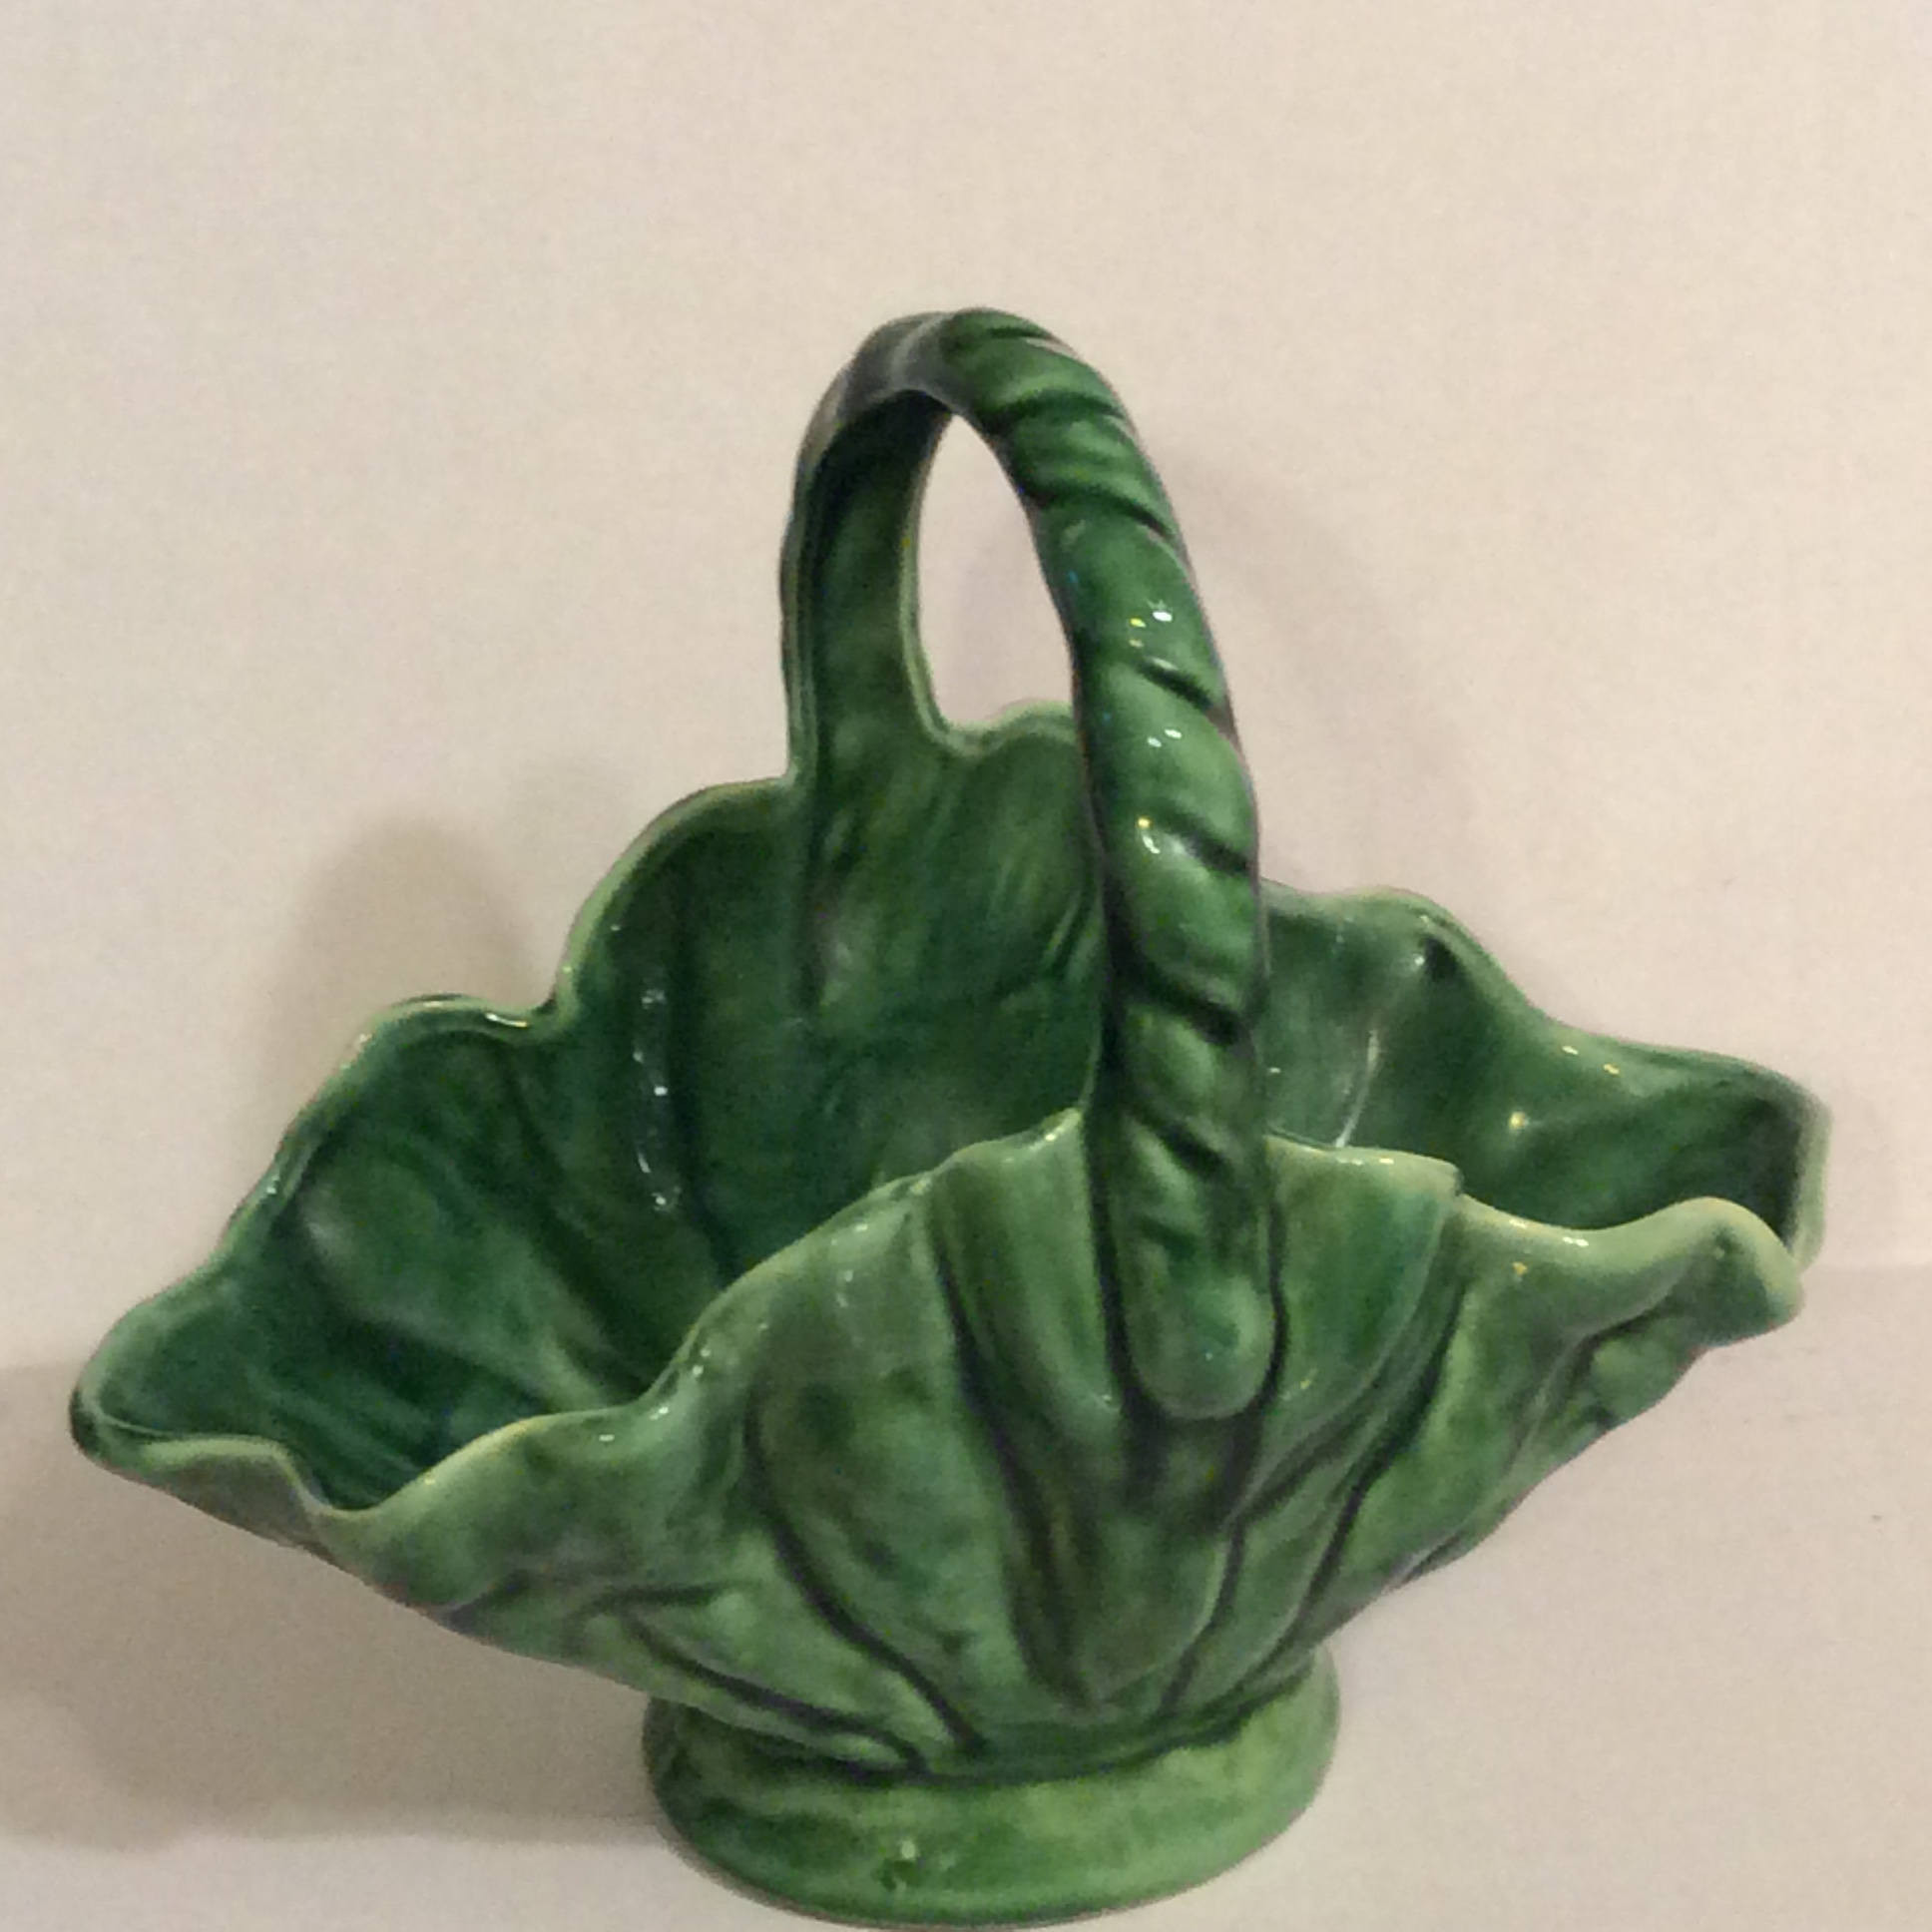 24 attractive Mccoy Pottery Green Vase 2024 free download mccoy pottery green vase of free ship to you camark pottery handled basket green vintage throughout dc29fc294c28ezoom